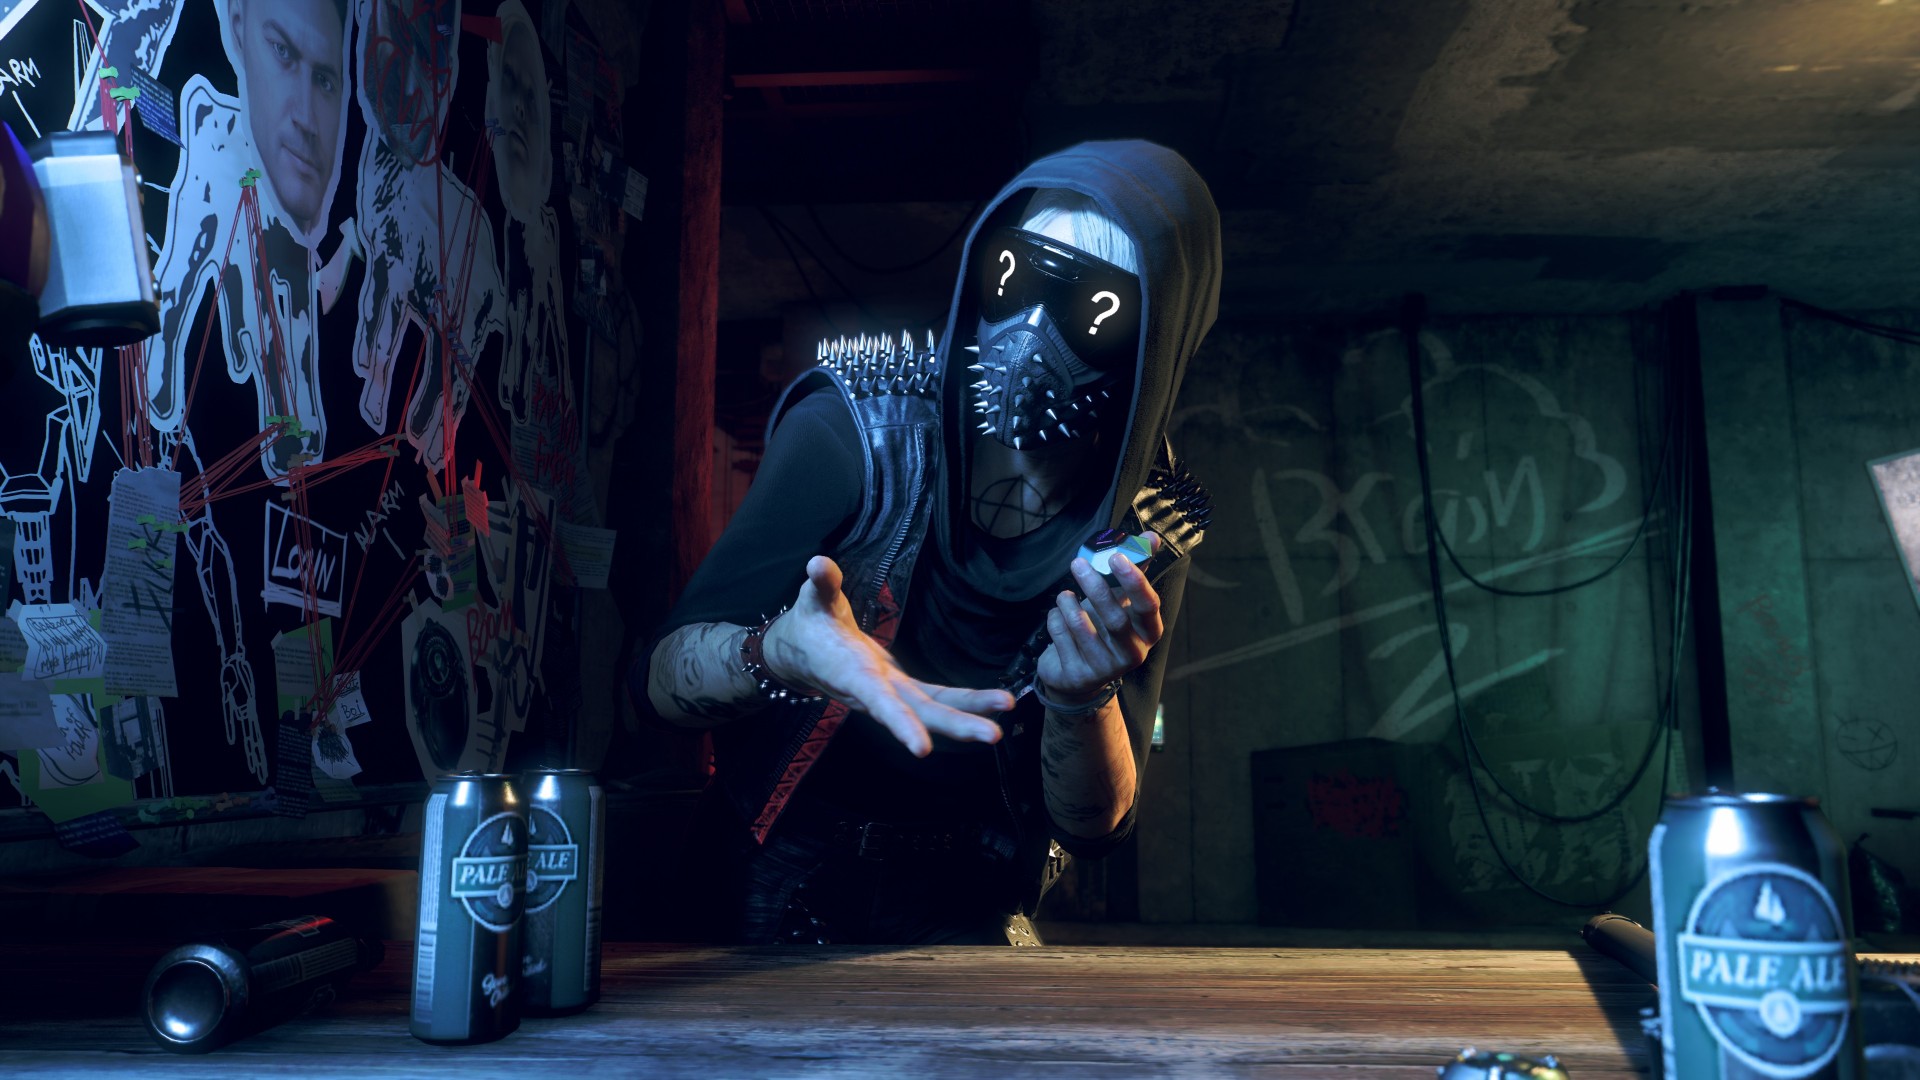 Watch Dogs: Legion – Bloodline Teaser Sets up Aiden Pearce's Trip to London